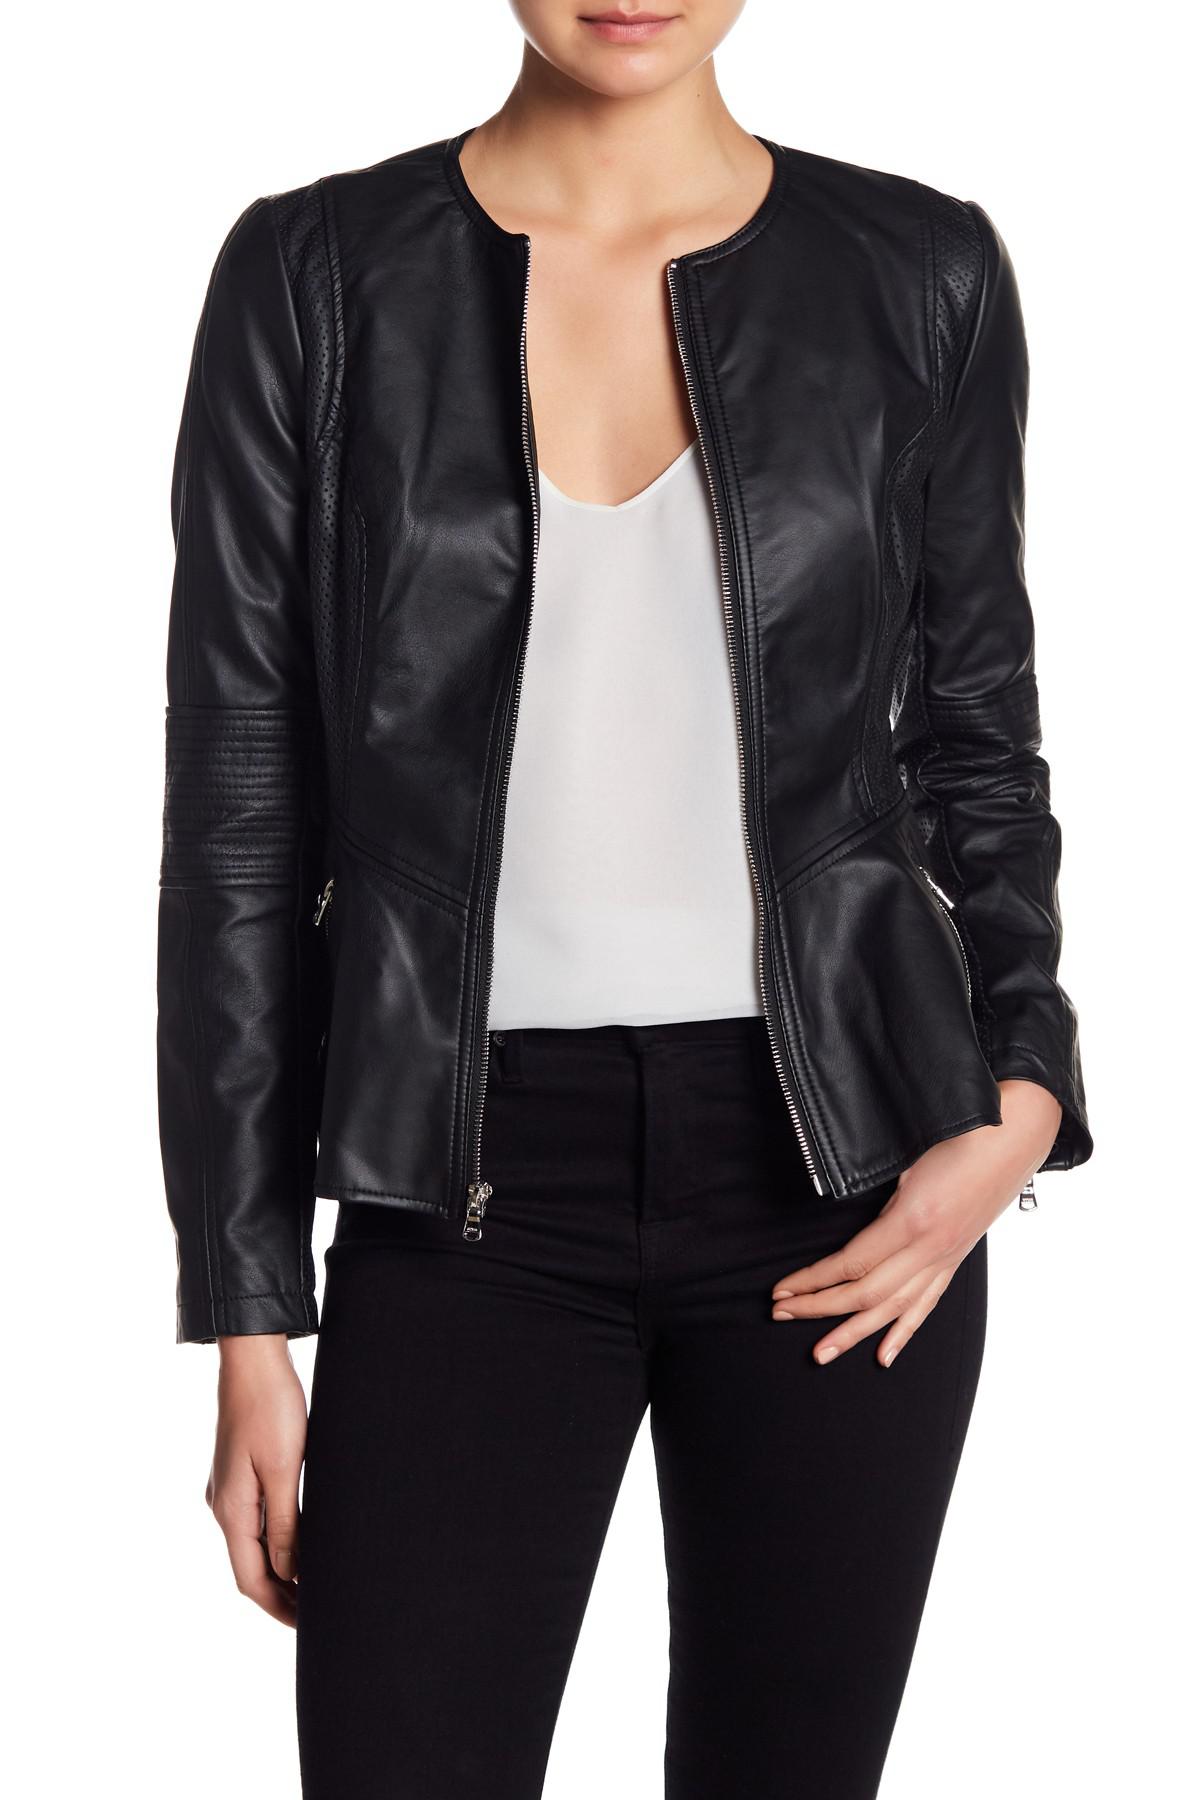 Guess Peplum Faux Leather Jacket in Black | Lyst